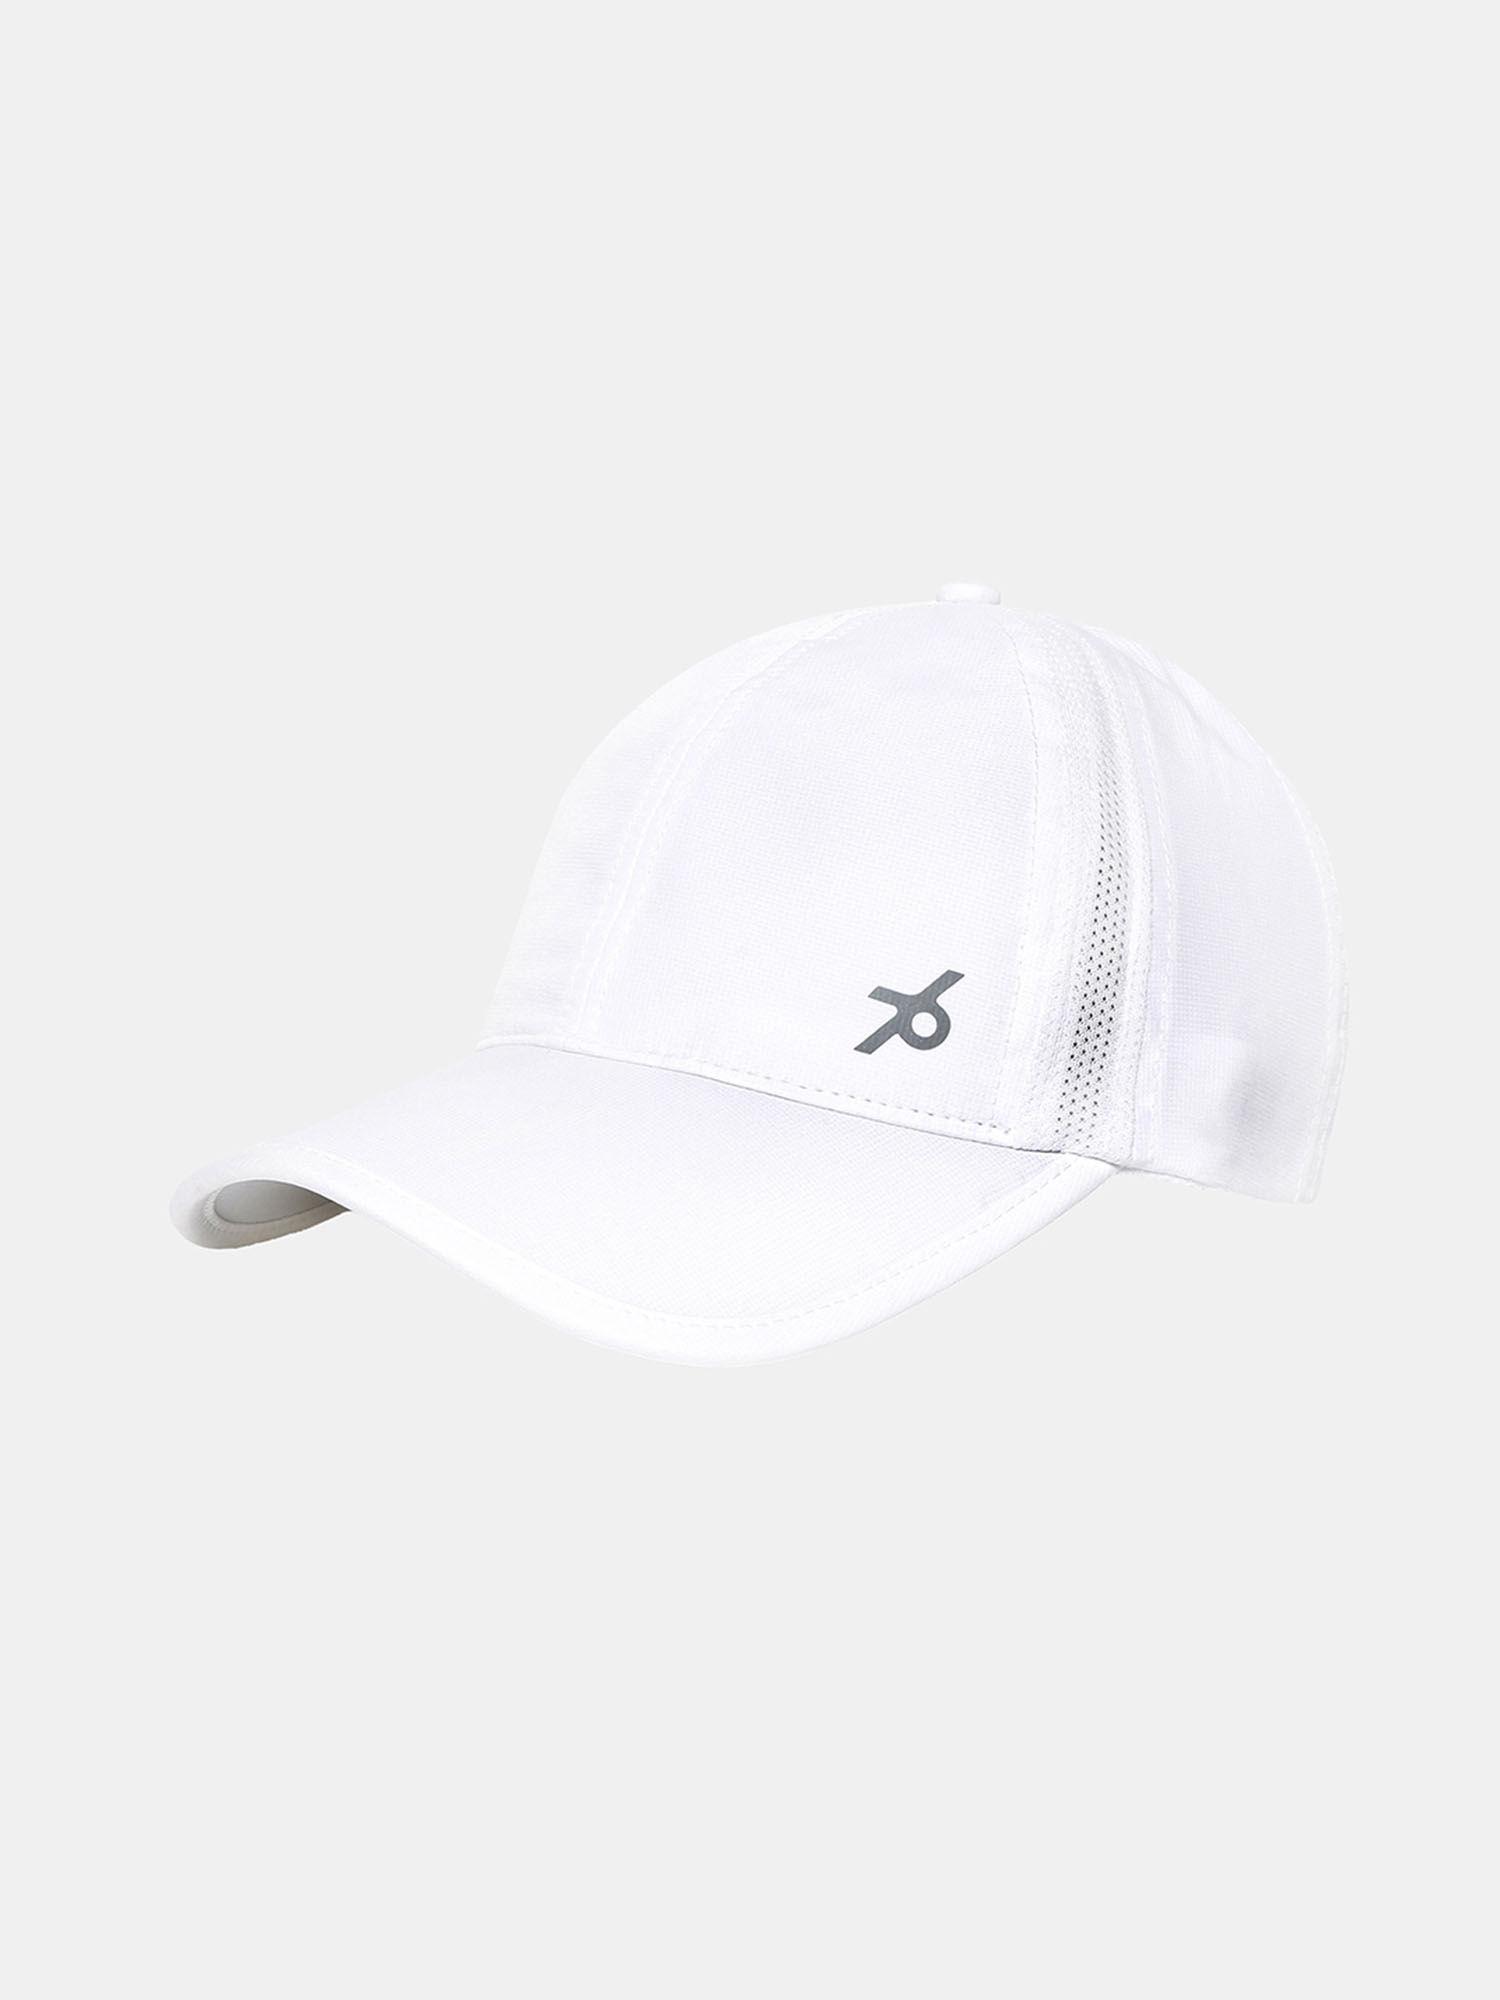 cp21 polyester solid cap with adjustable back closure and stay dry white